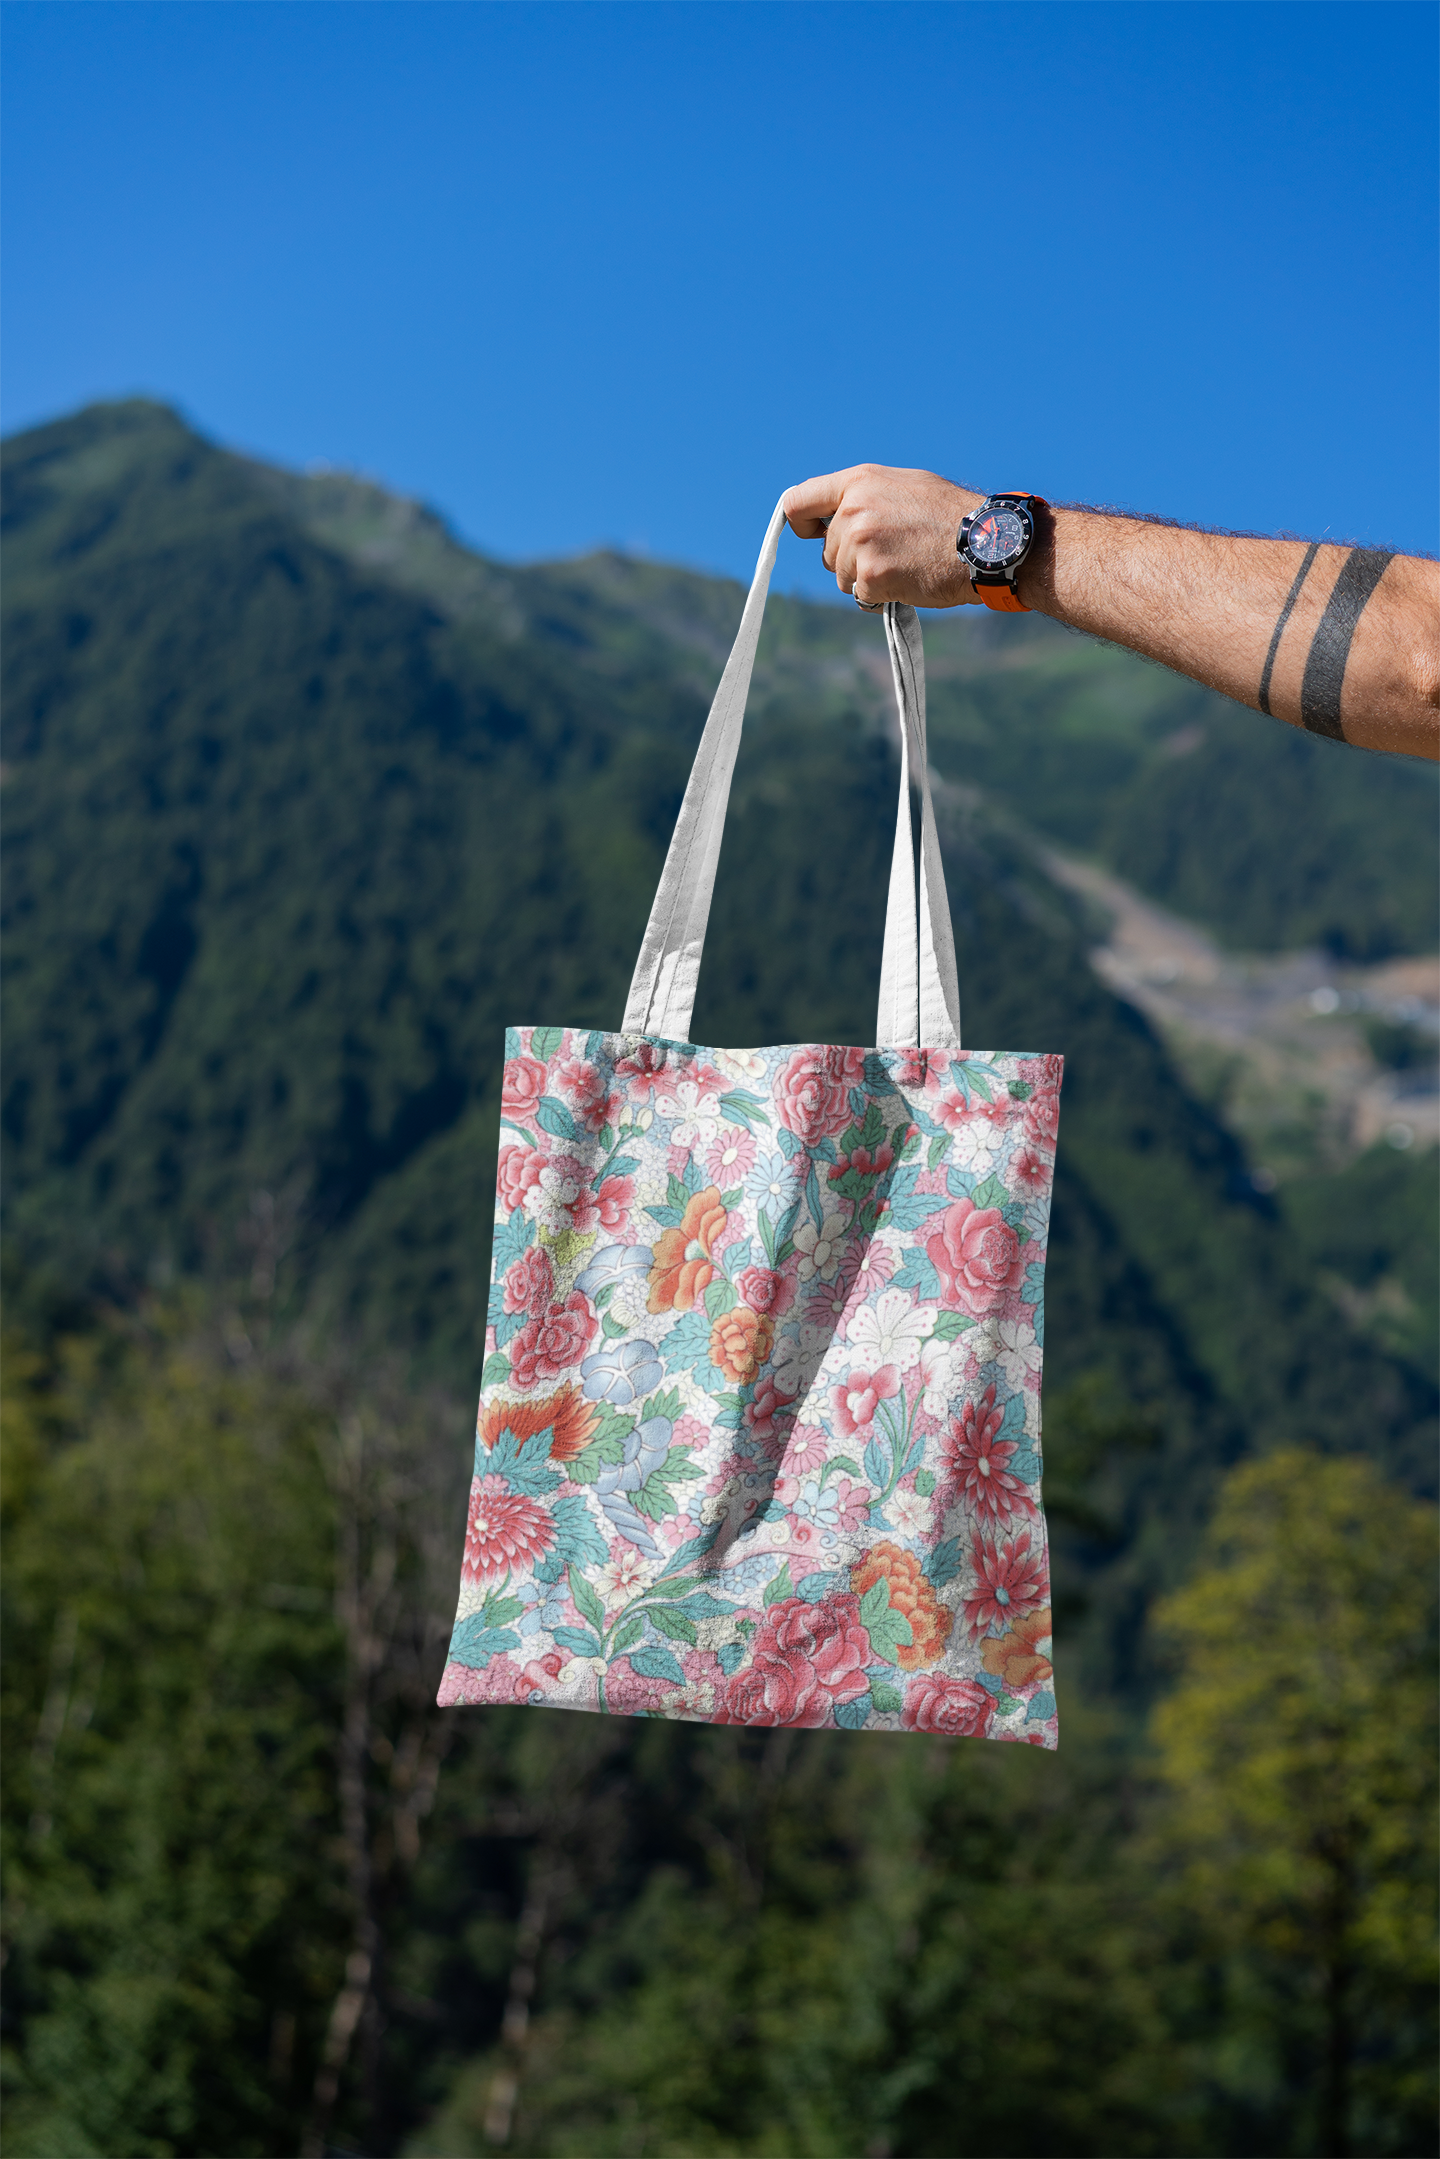 mockup-featuring-a-man-s-hand-holding-a-tote-bag-against-a-natural-scenery-3131-el1 (11).png